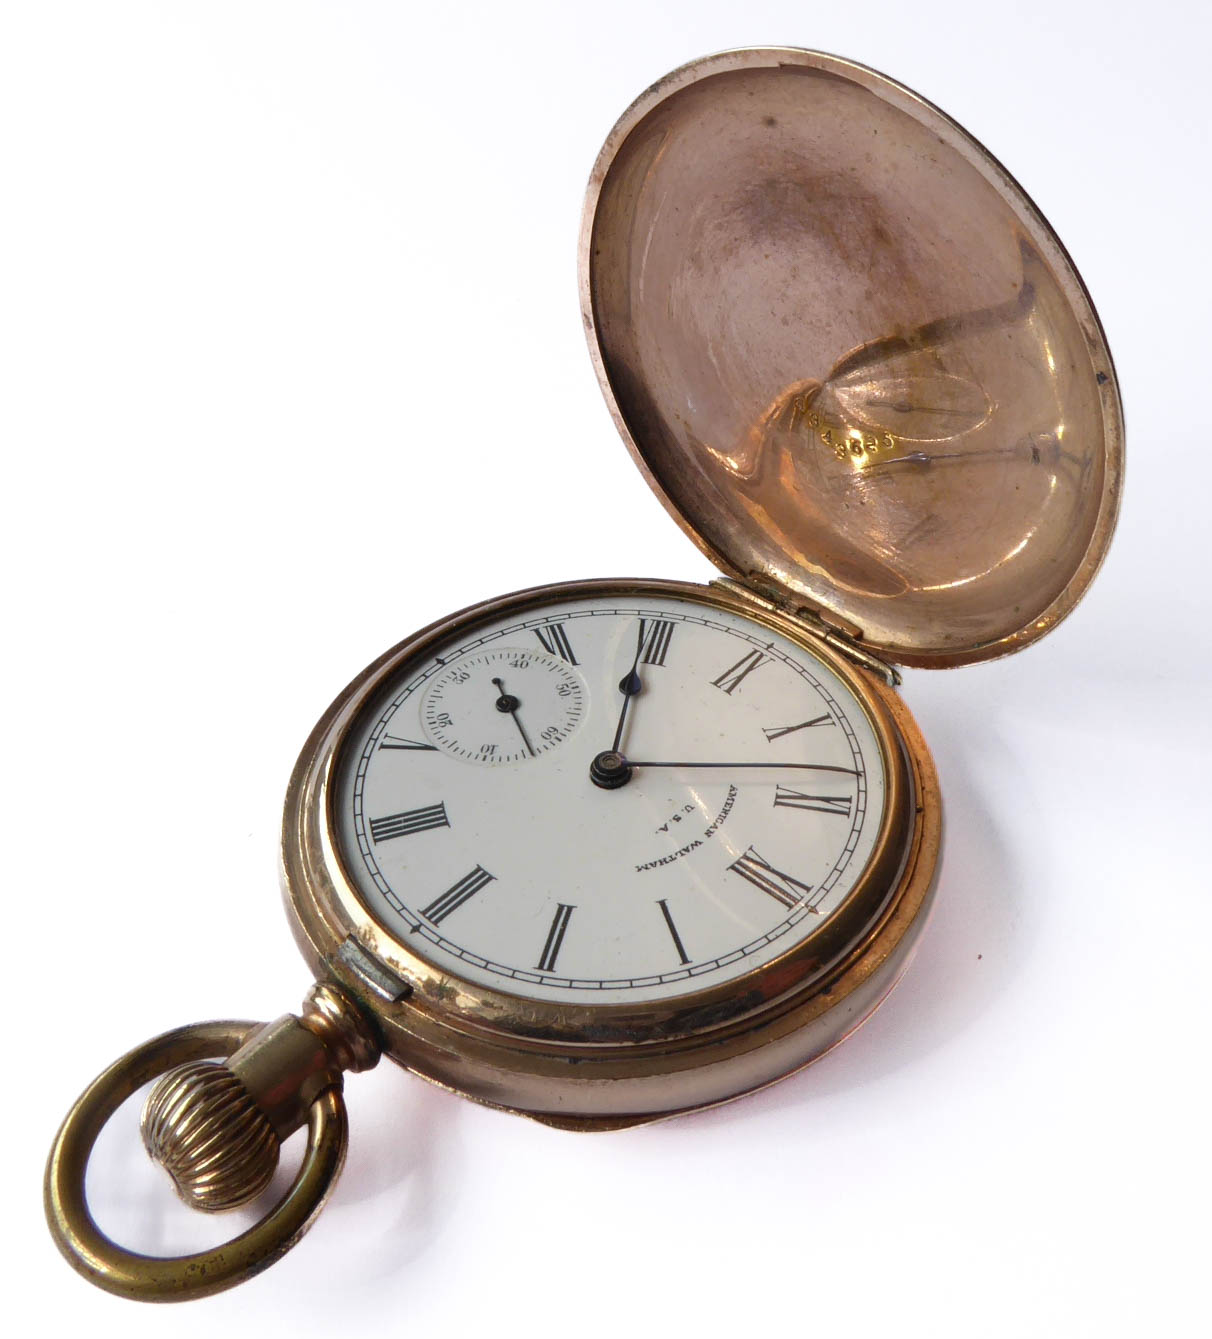 A silver-cased gentleman's pocket watch with an ornate movement signed Lister Newcastle upon Tyne - Image 4 of 5